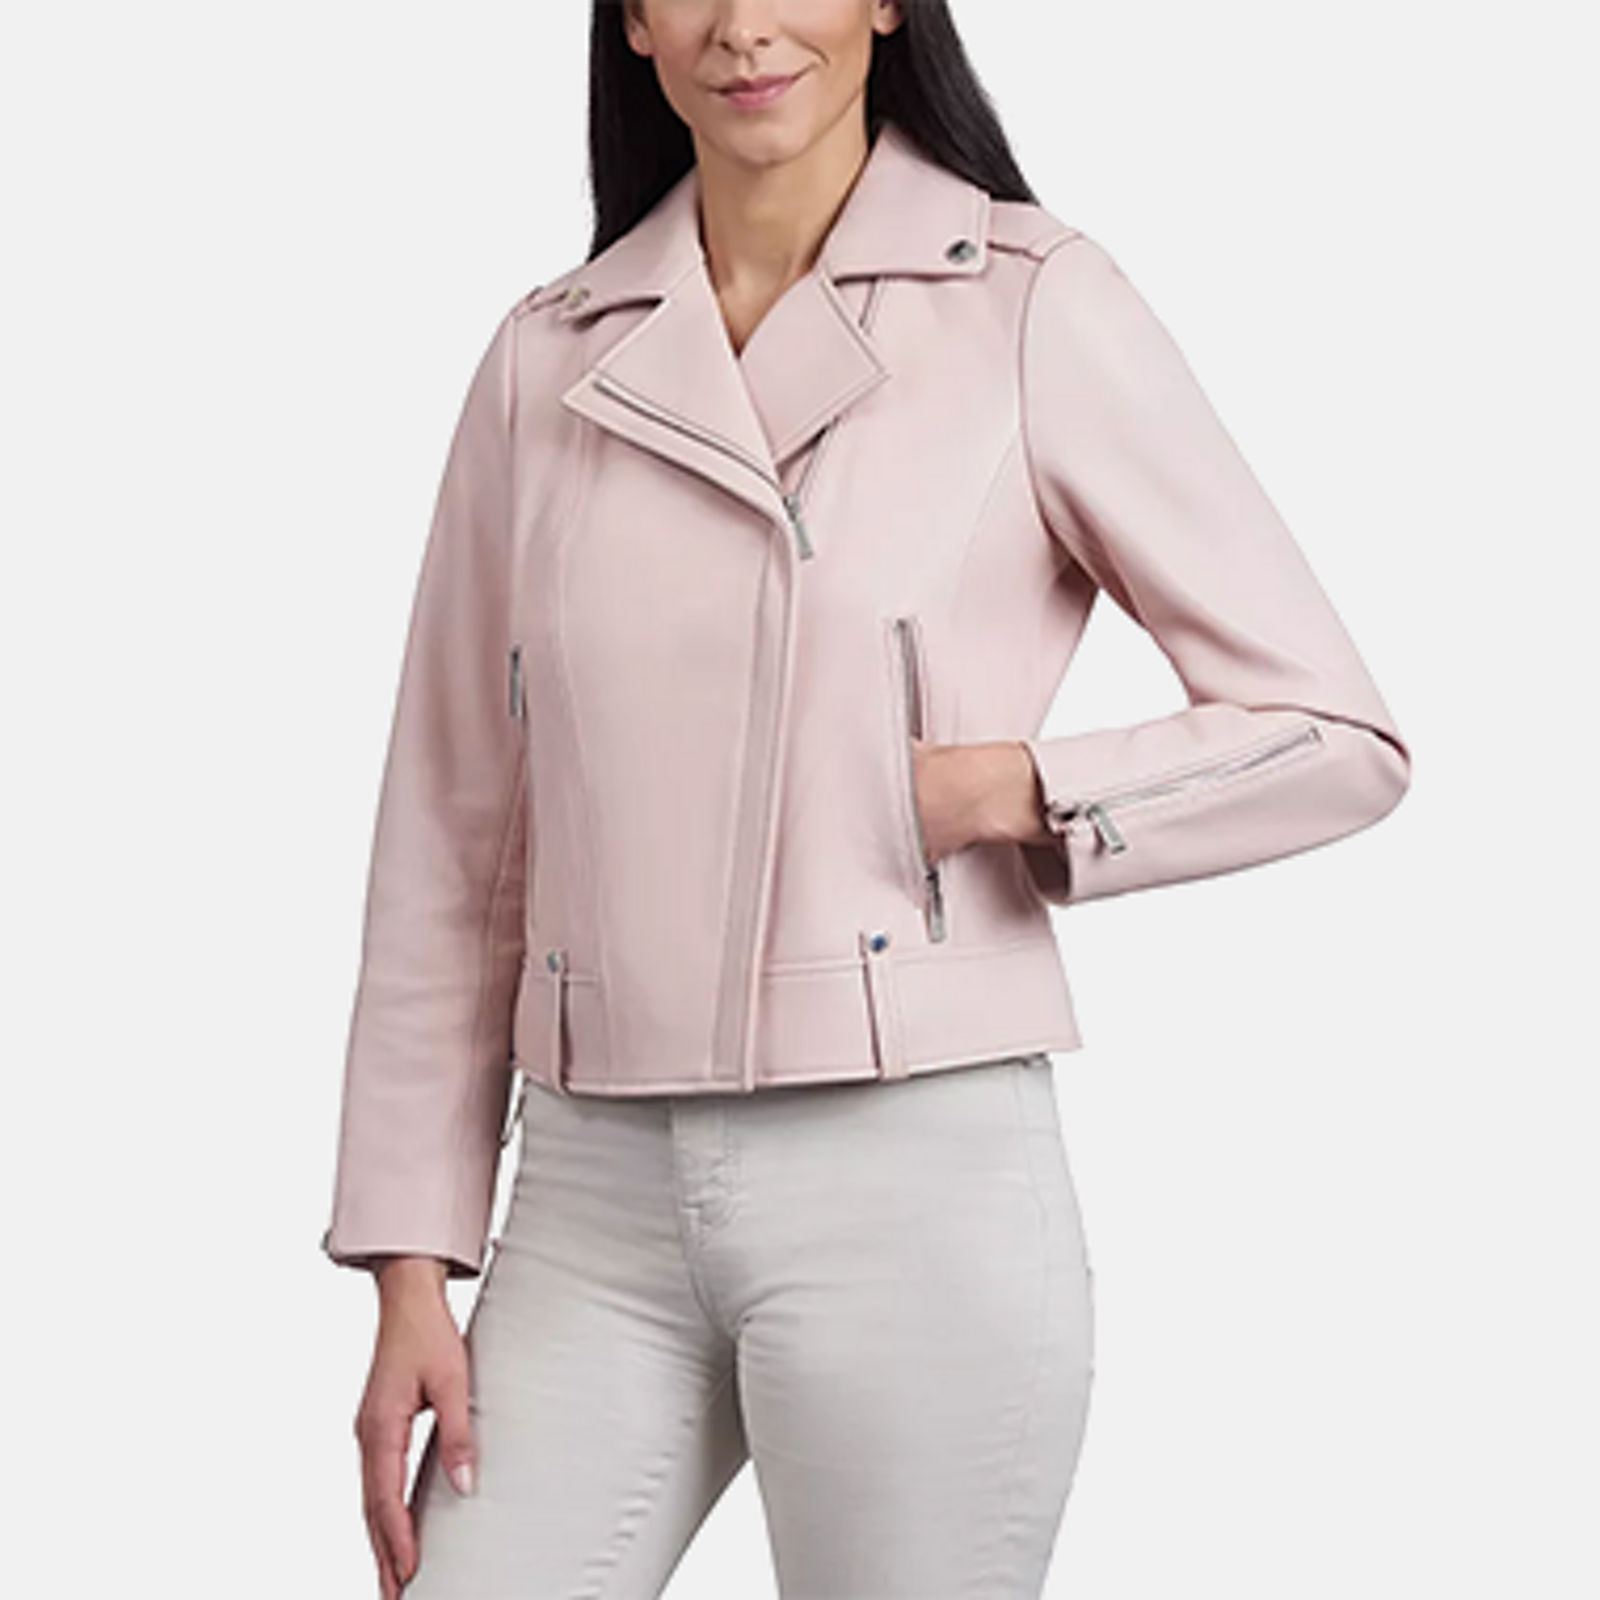 Clearance/Closeout Coats & Jackets For Women - Macy's